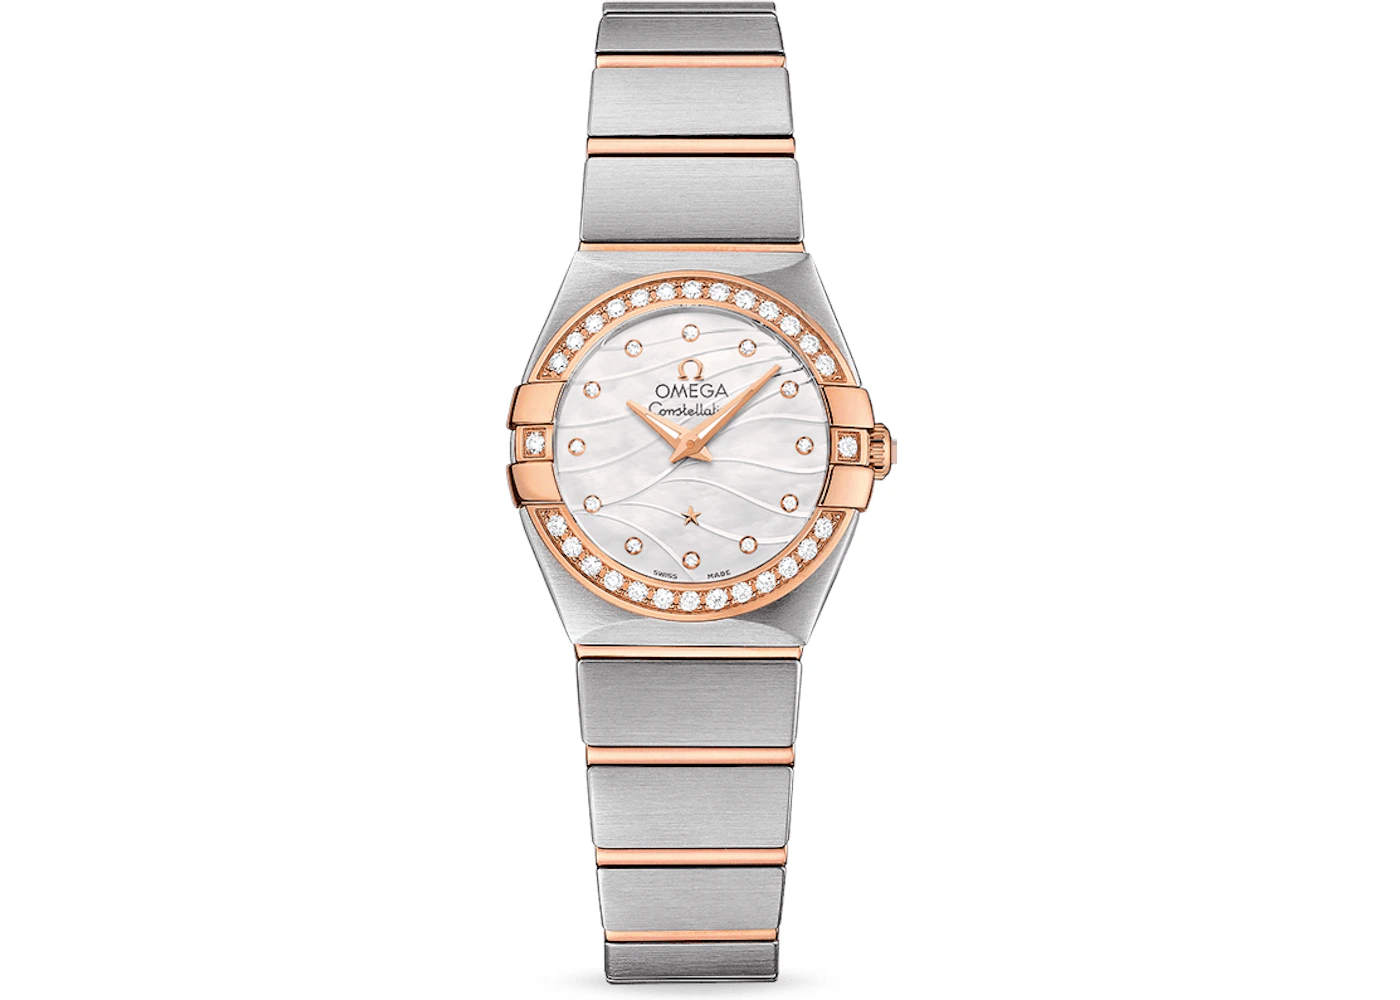 Omega Constellation 123.25.24.60.55.012 24mm in Steel/Rose Gold - MX